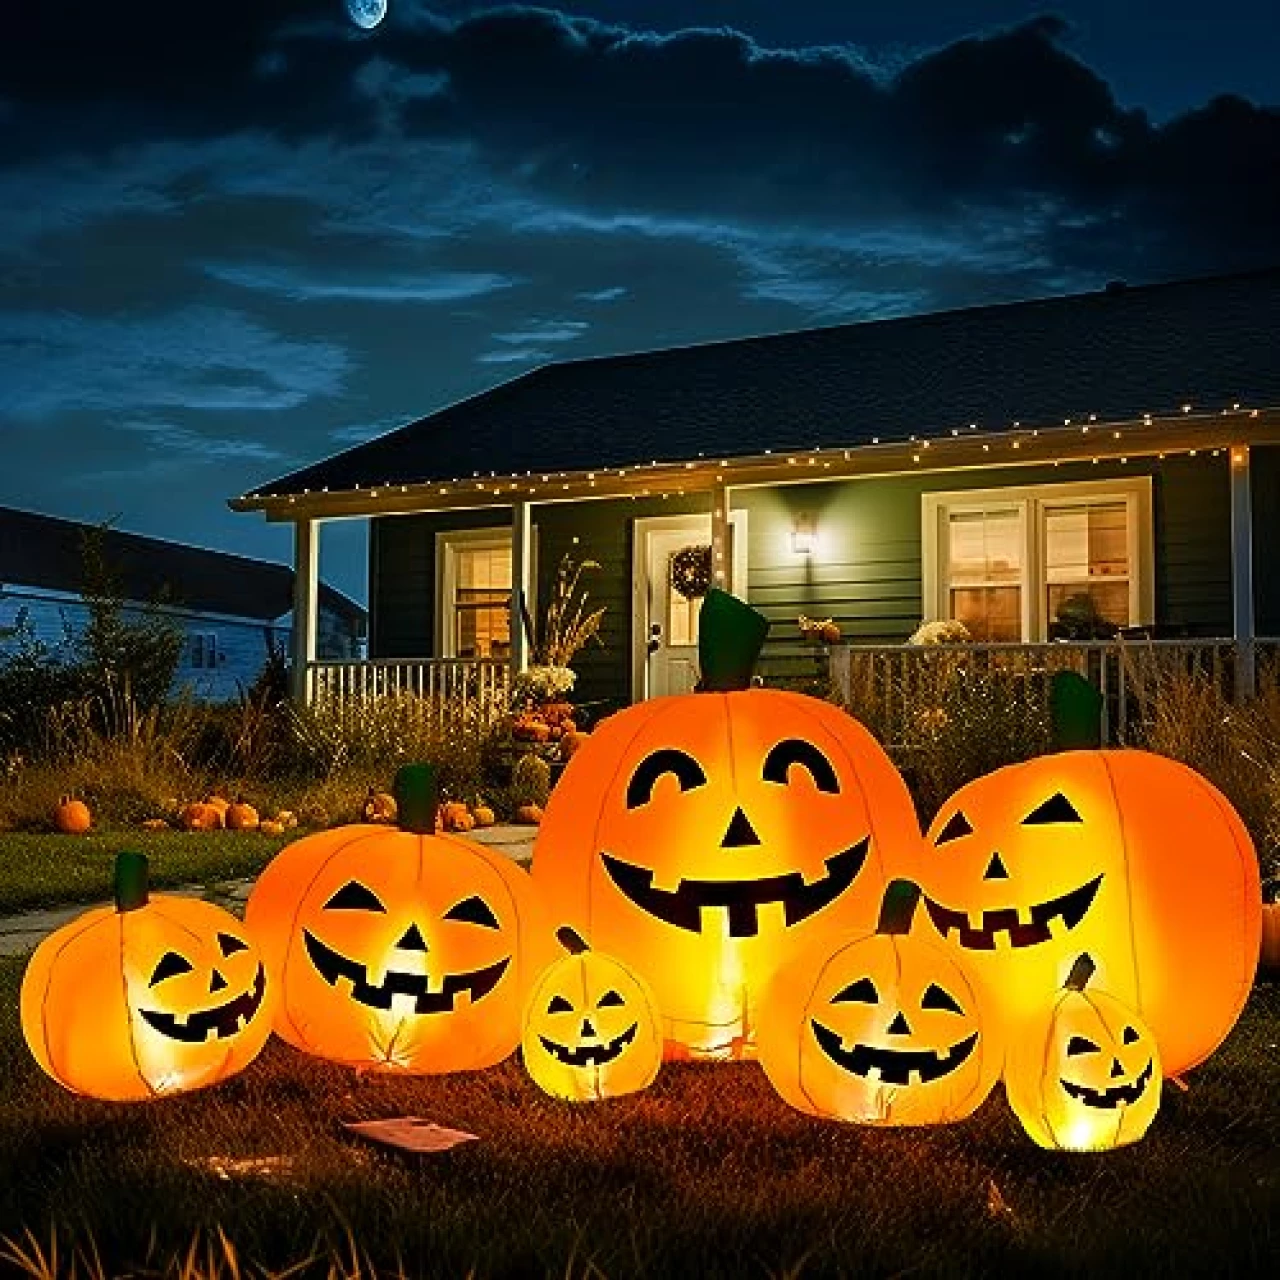 7.5FT Halloween Inflatables Decorations Pumpkin, Inflatables Outdoor Decorations Inflatable Pumpkin, Halloween Decorations Blow Ups Pumpkin for Yard,Party,Garden(Cold White,7 Built-in LED Lights Set)